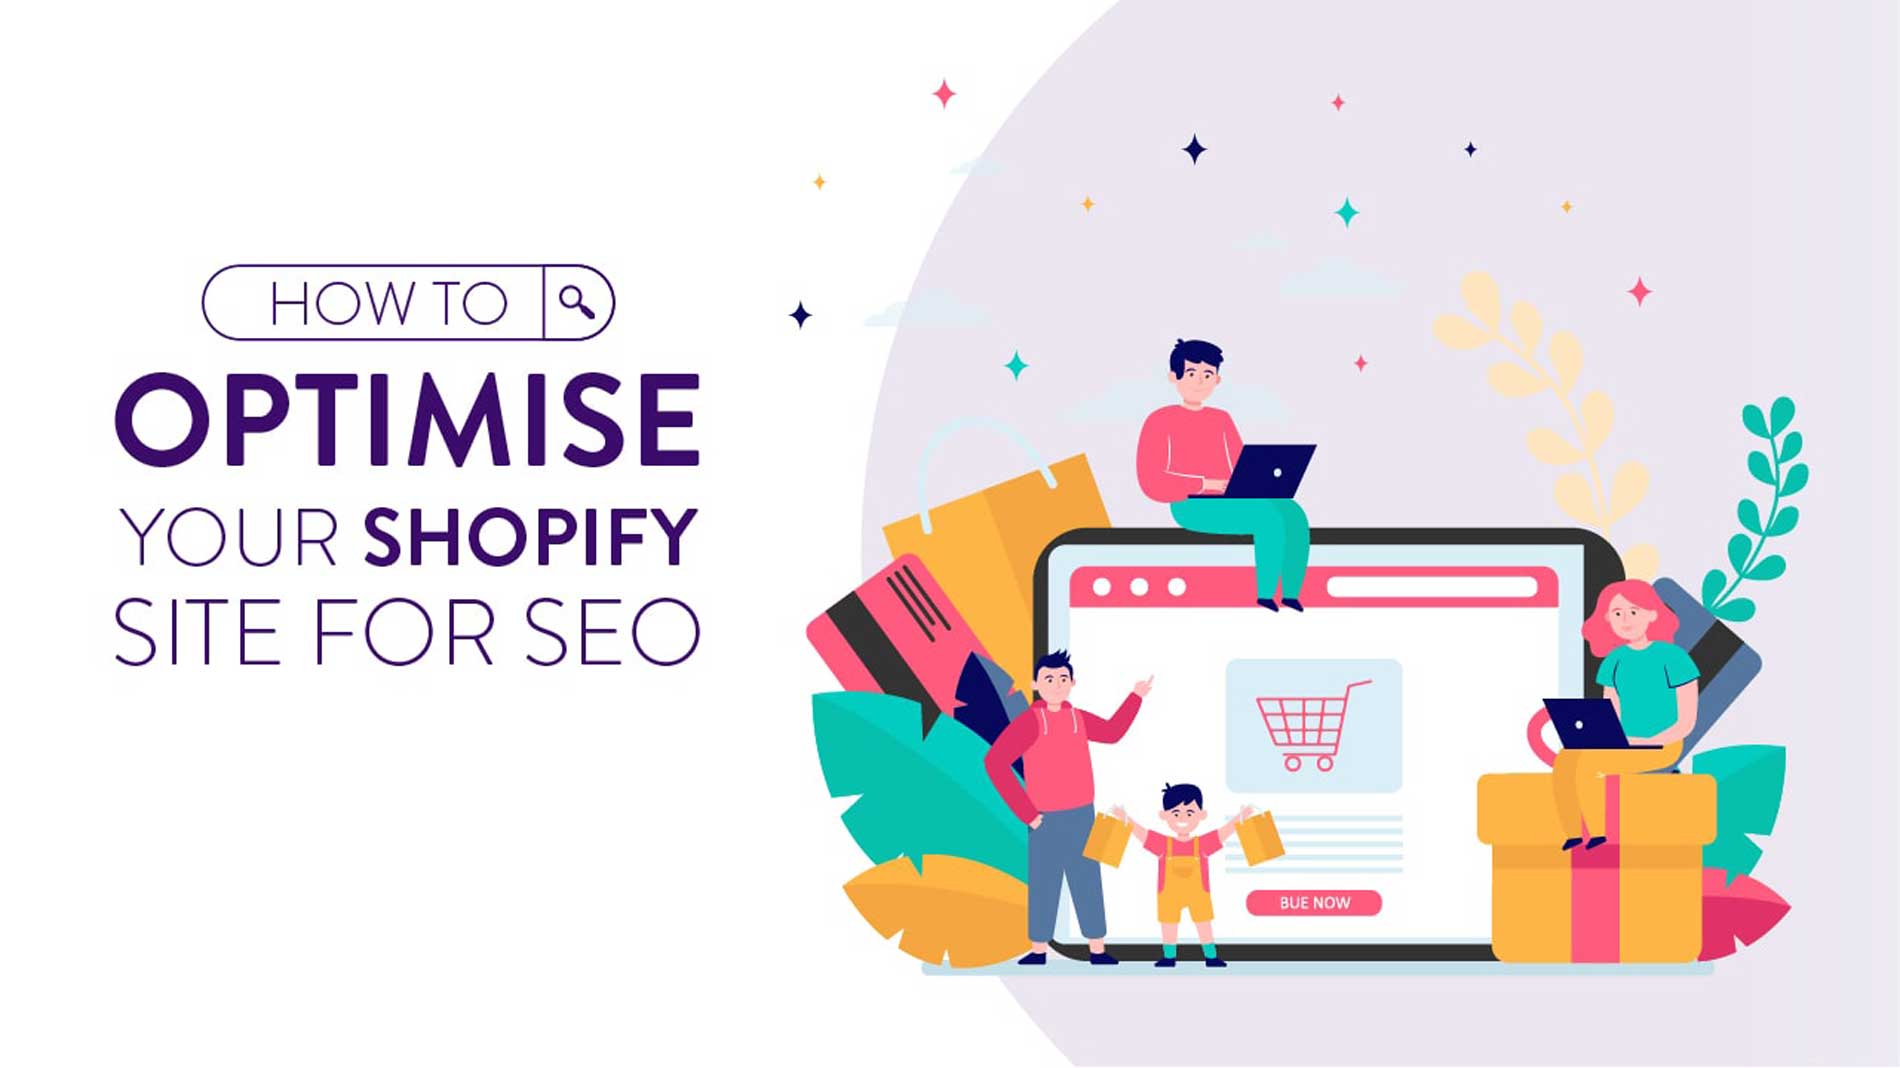 How to Optimise Your Shopify Site for SEO